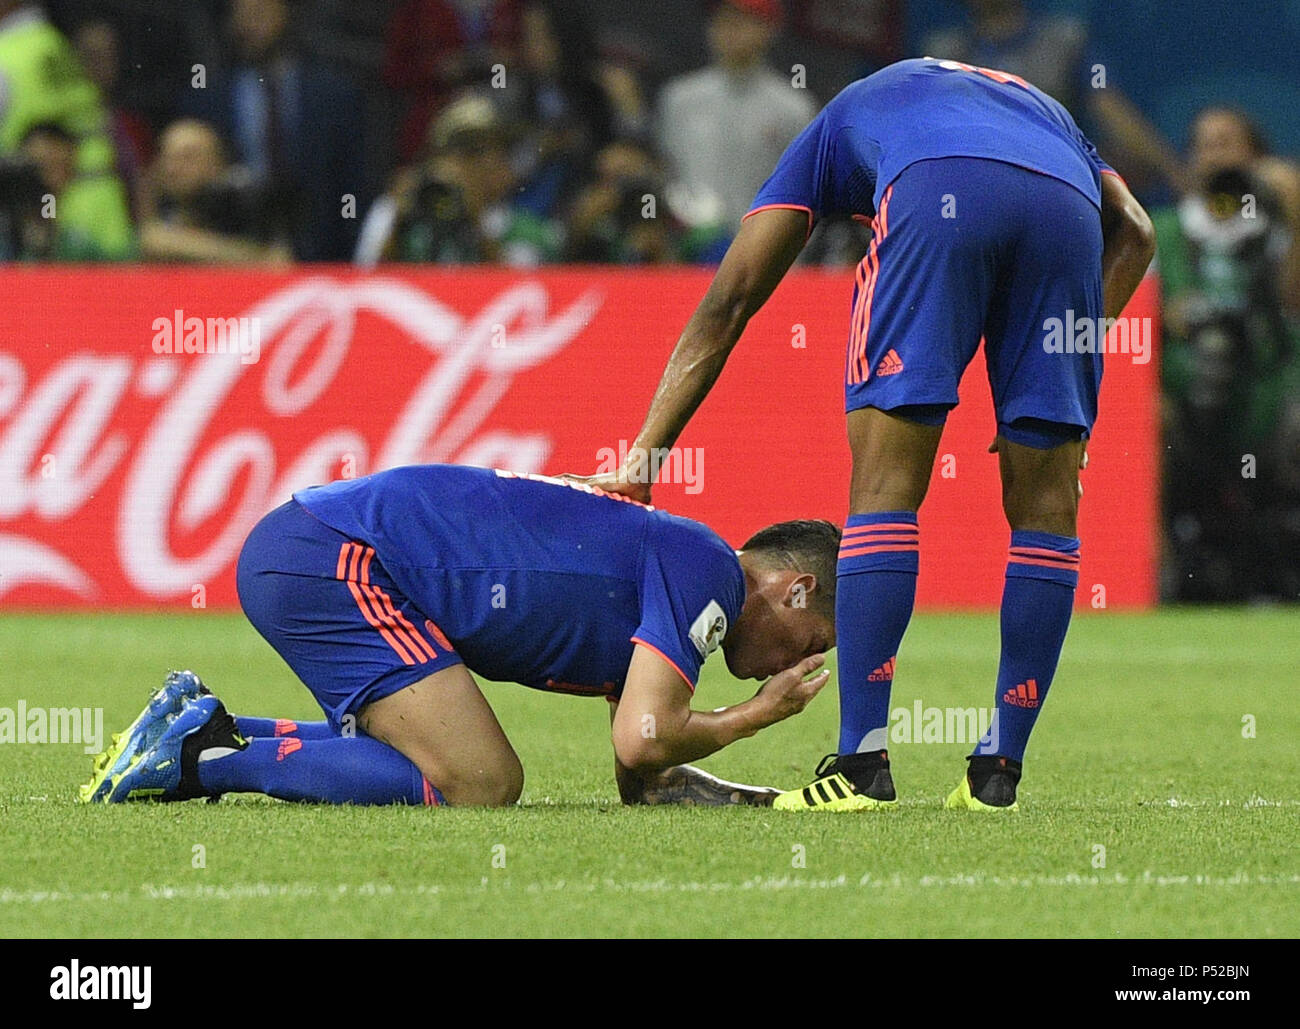 Kazan, Russia. 24th June, 2018. James Rodriguez (L) of Colombia sustains injury during the 2018 FIFA World Cup Group H match between Poland and Colombia in Kazan, Russia, June 24, 2018. Credit: Lui Siu Wai/Xinhua/Alamy Live News Stock Photo